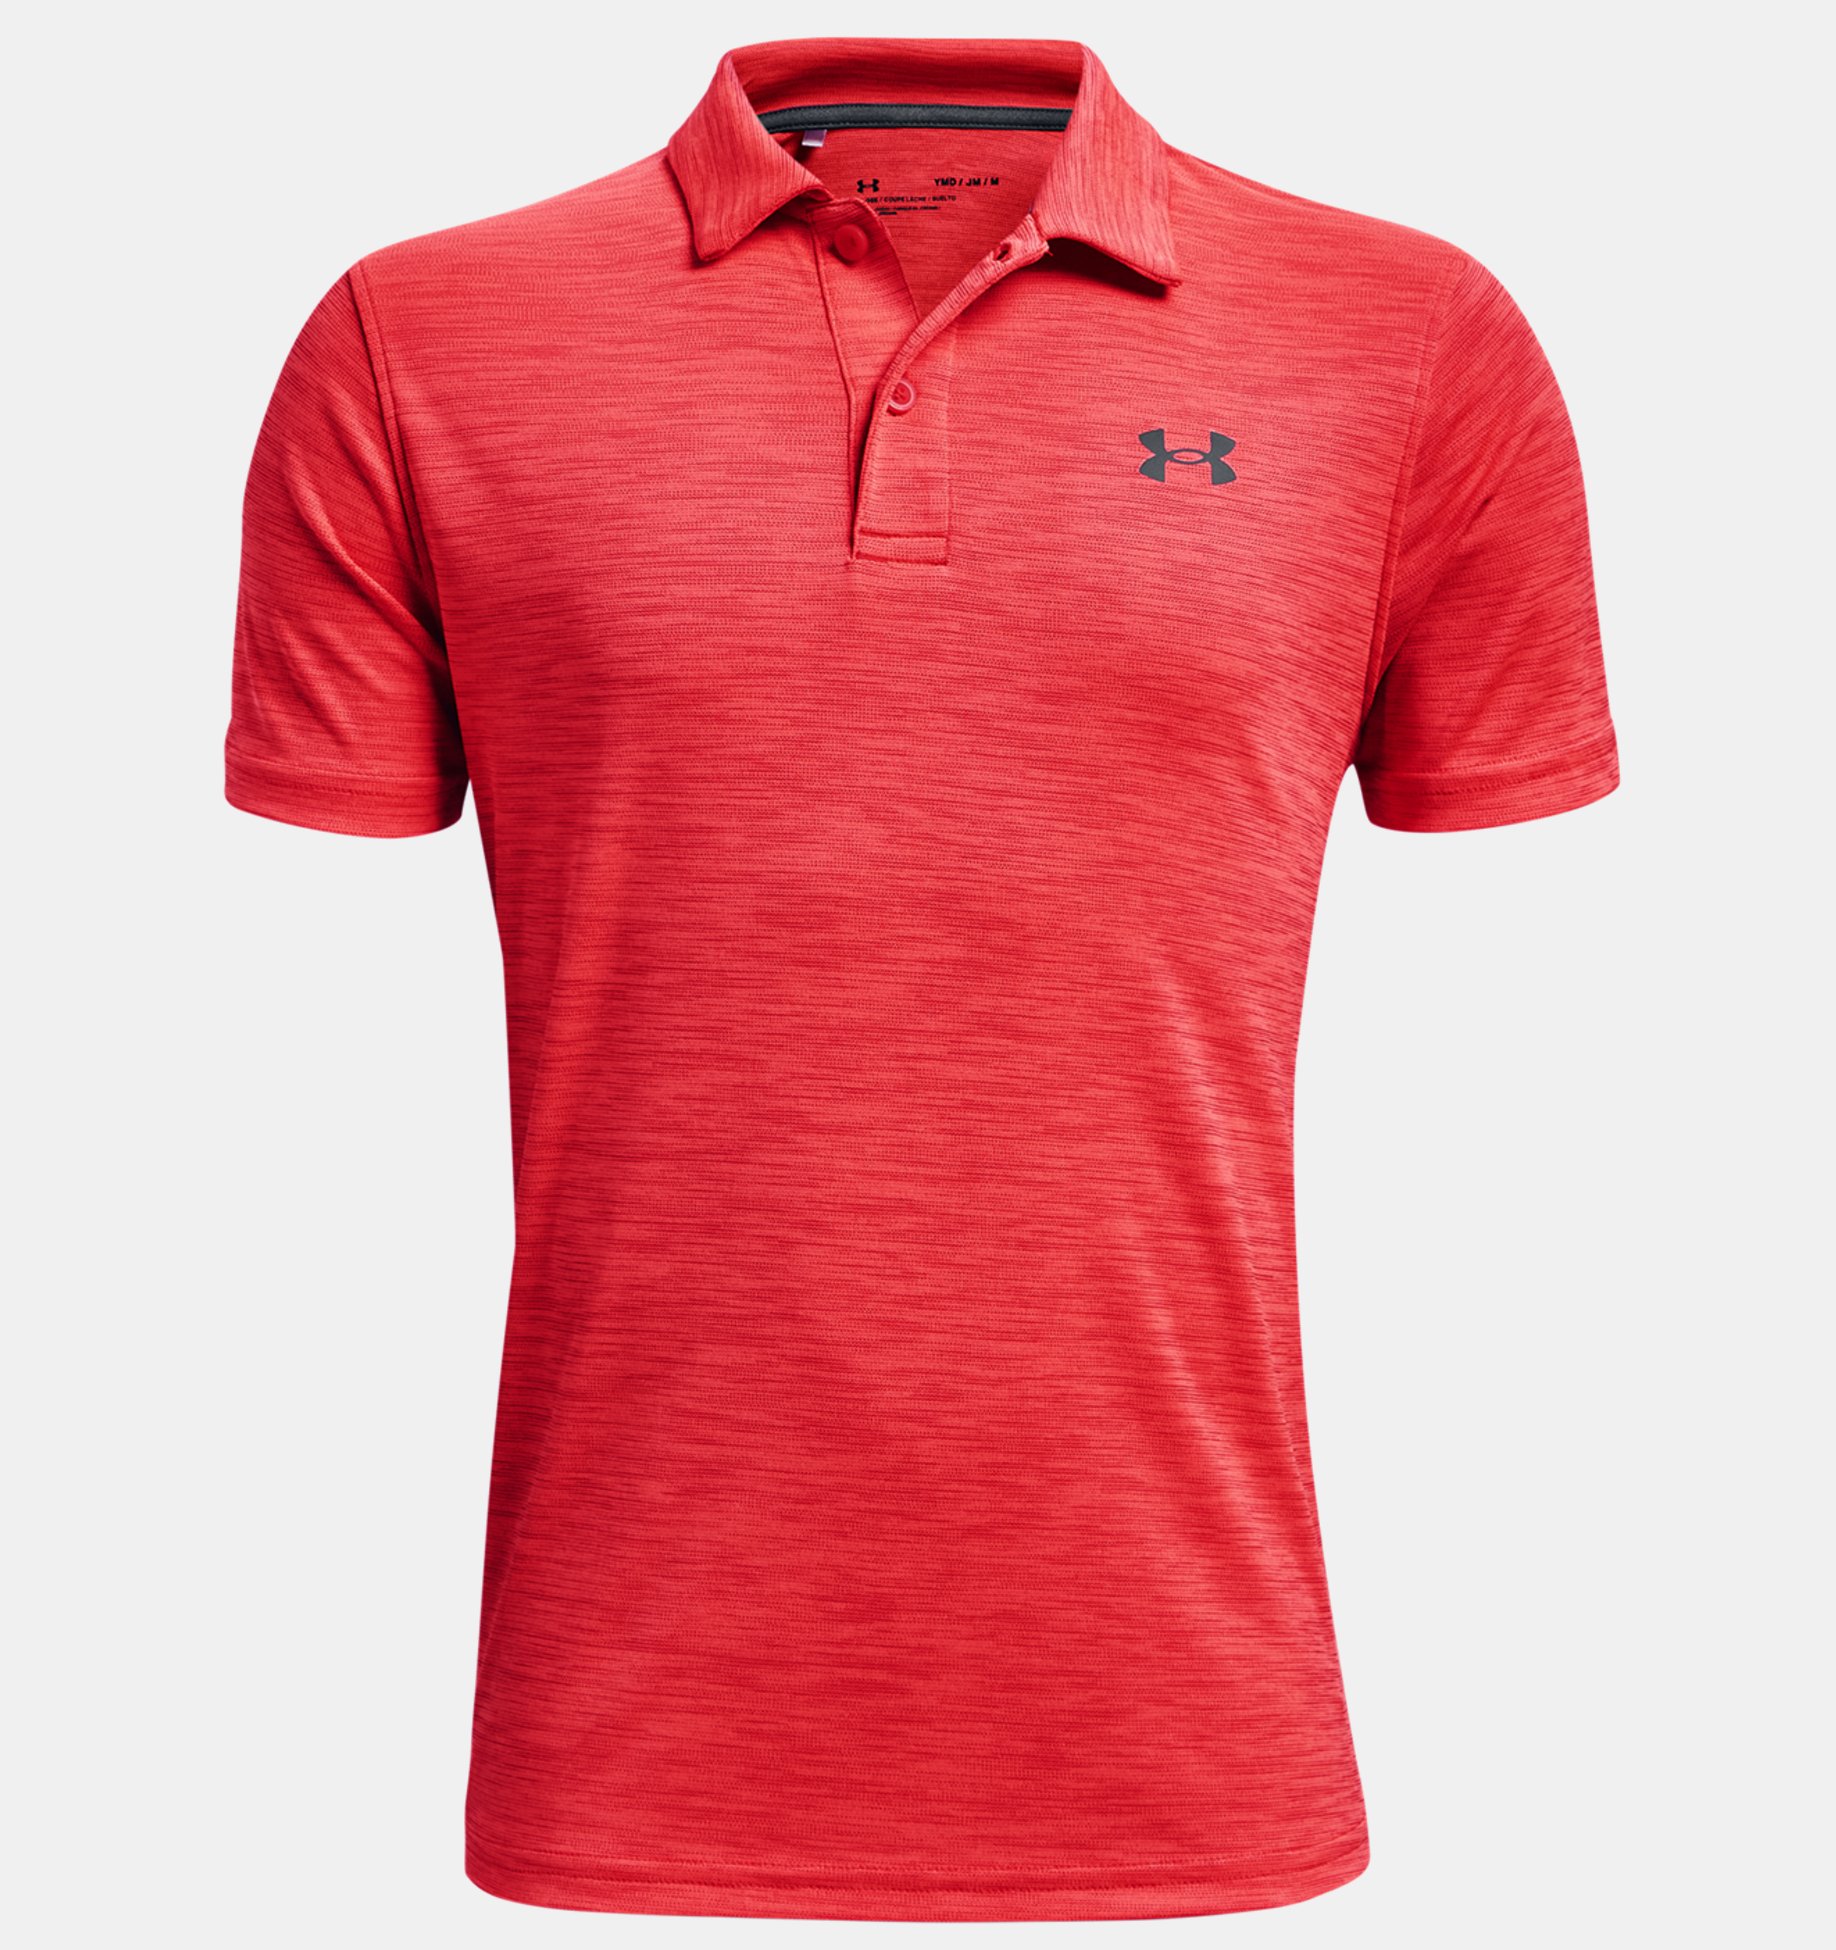 Details about   NWT Under Armour YMPolo Red Boys Youth Medium Performance 1290341 Heatgear 